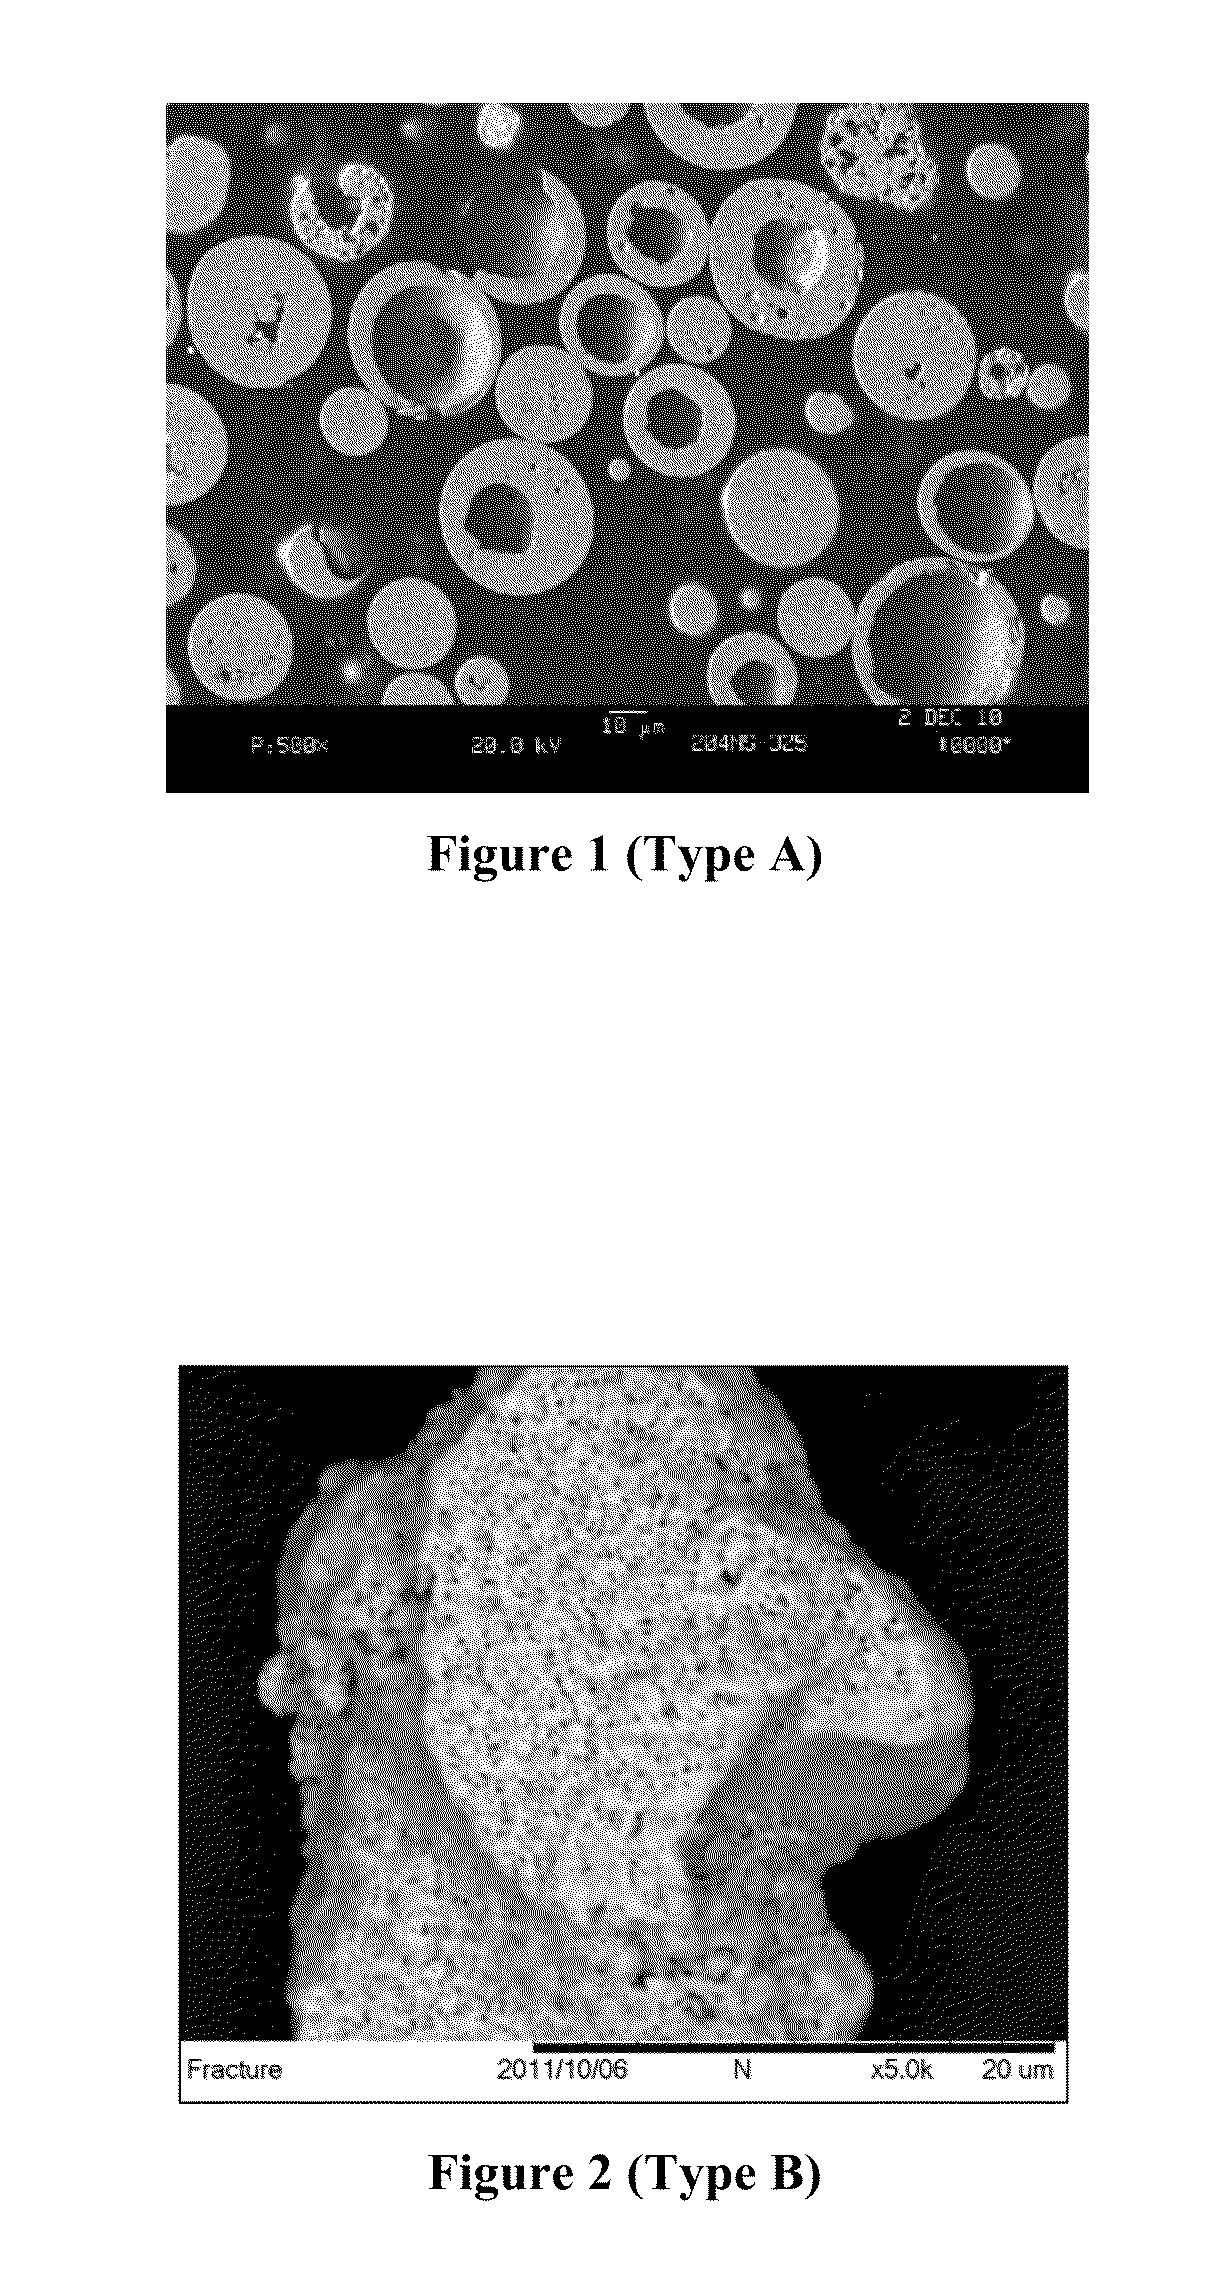 Aqueous slurry for the production of thermal and environmental barrier coatings and processes for making and applying the same